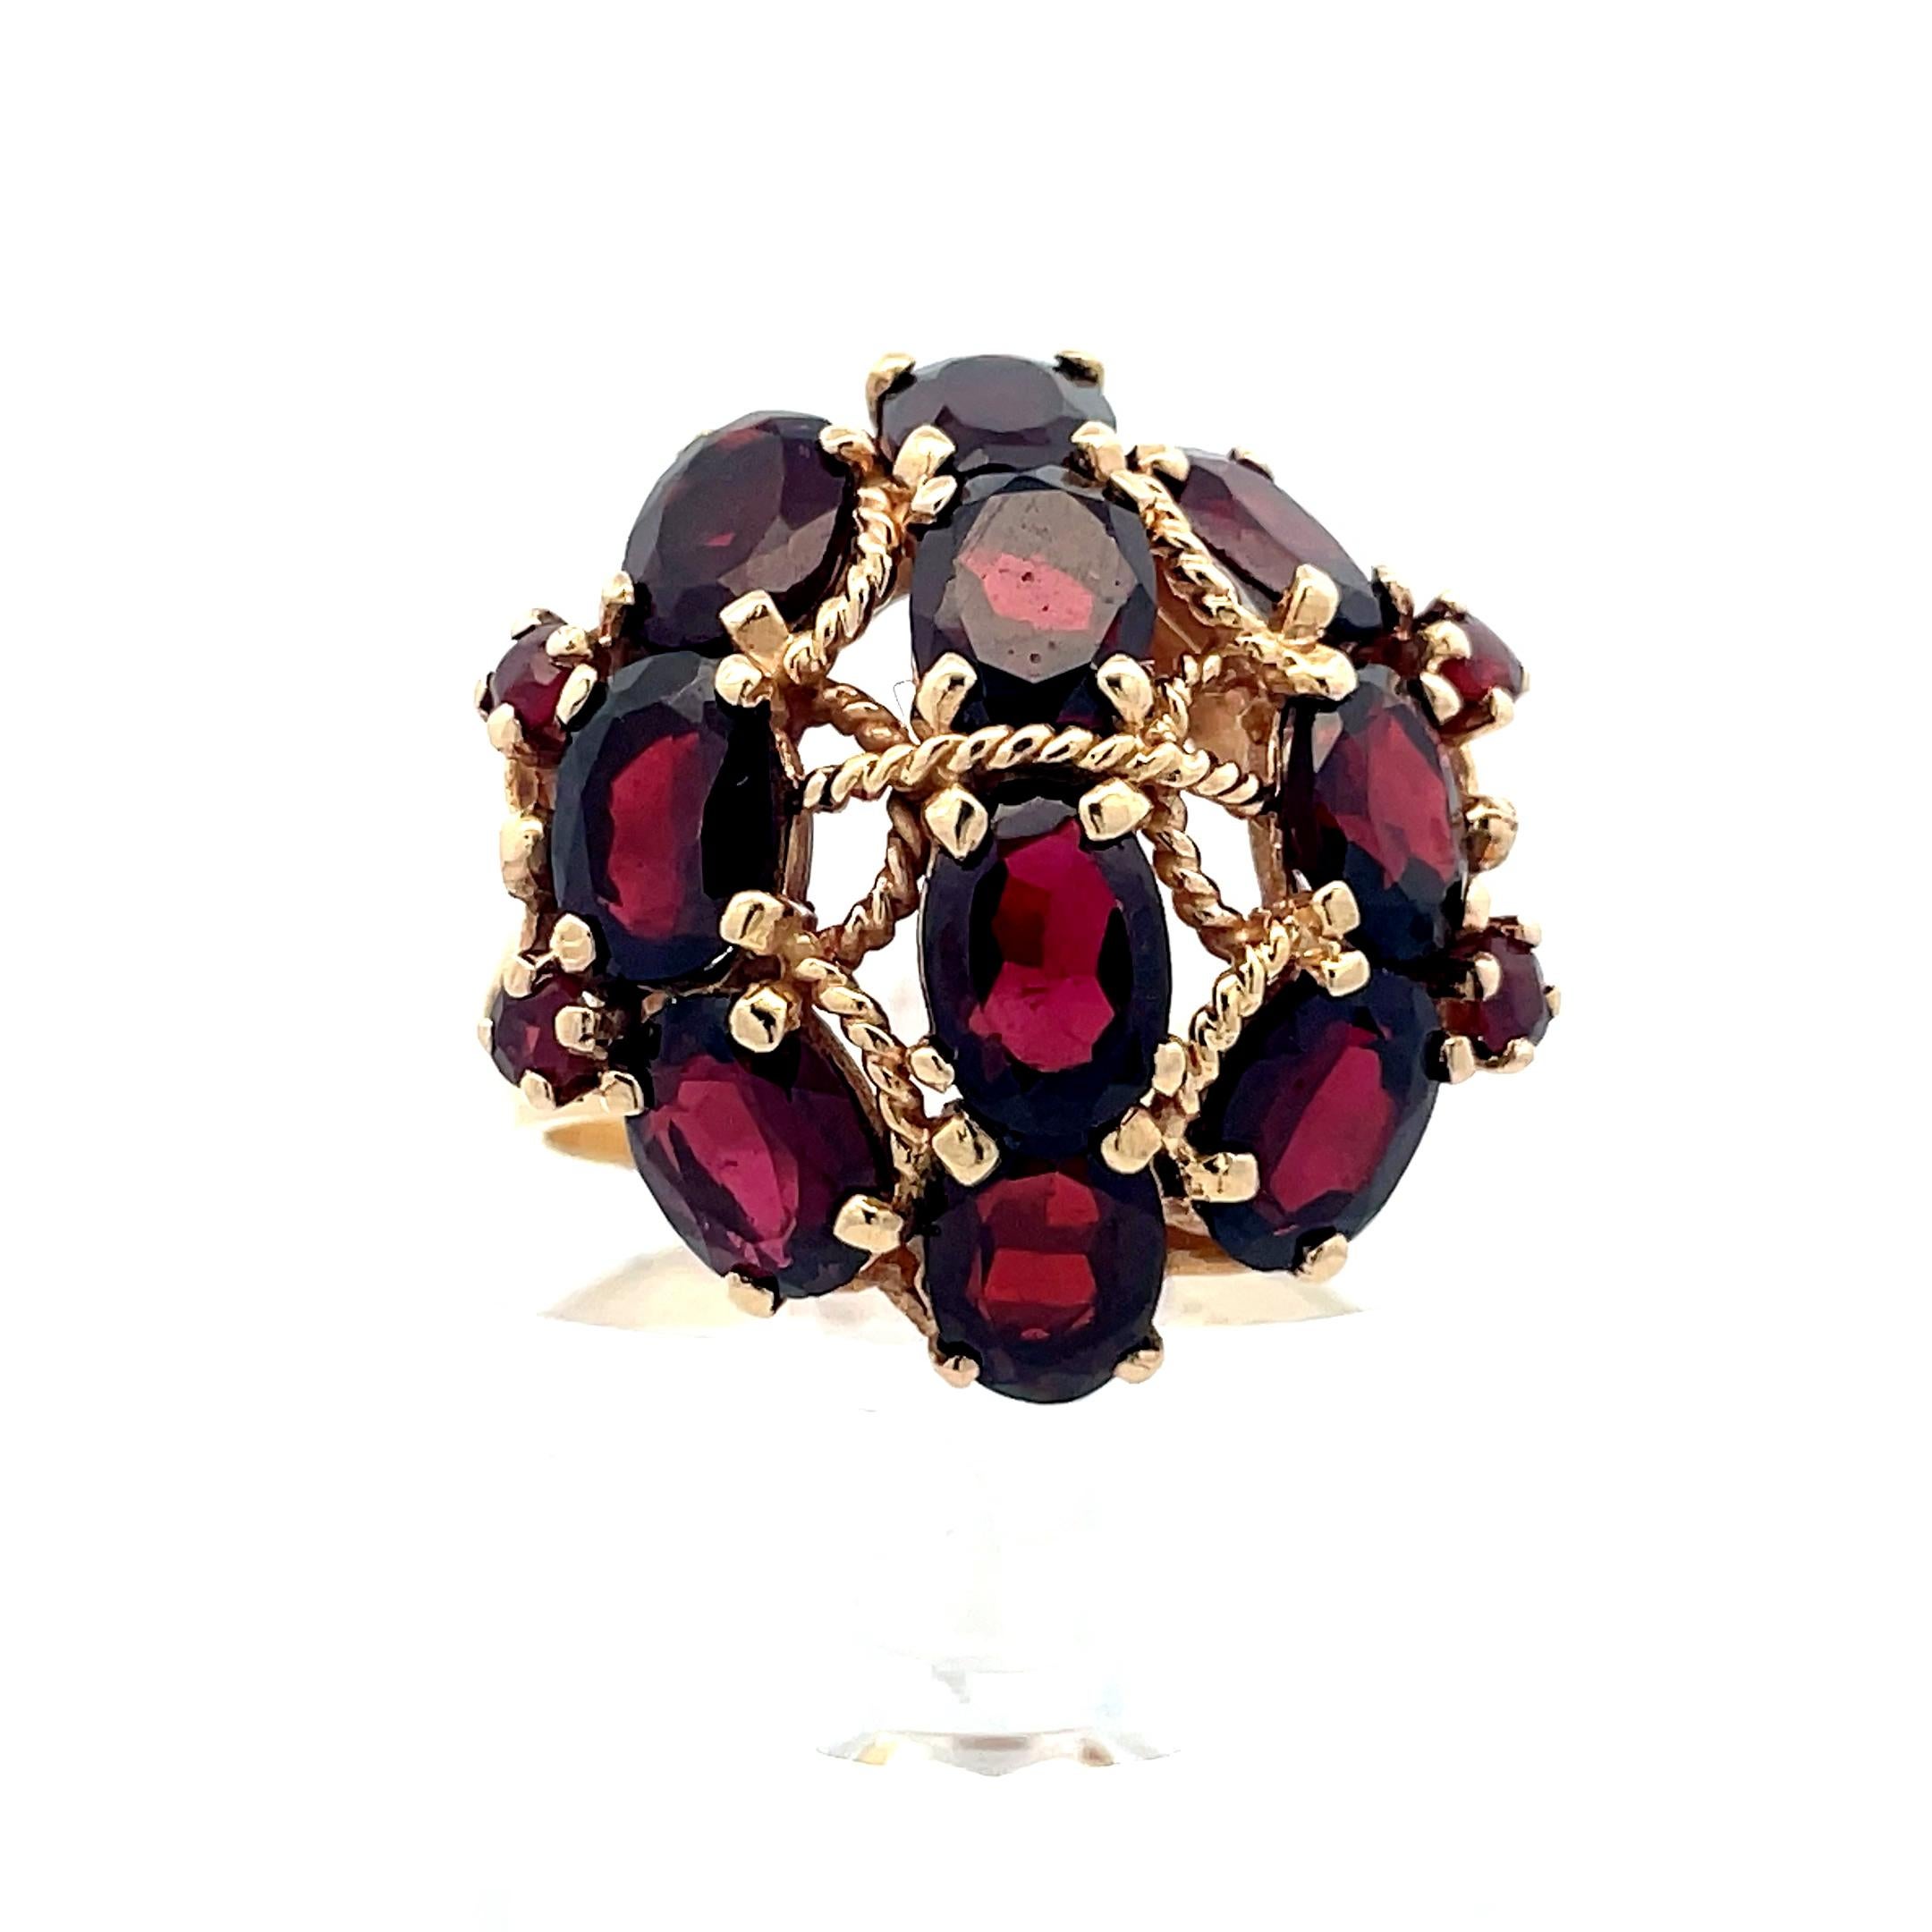 - 14K yellow gold 
- 6.36 cttw Garnet 
- 1960s 
- 11.03 grams 

This is a beautiful cluster ring from the 1960s made in 14k yellow gold with beautiful garnet clusters. This ring contains 10, beautiful oval cut garnets, as well as 4 round cut